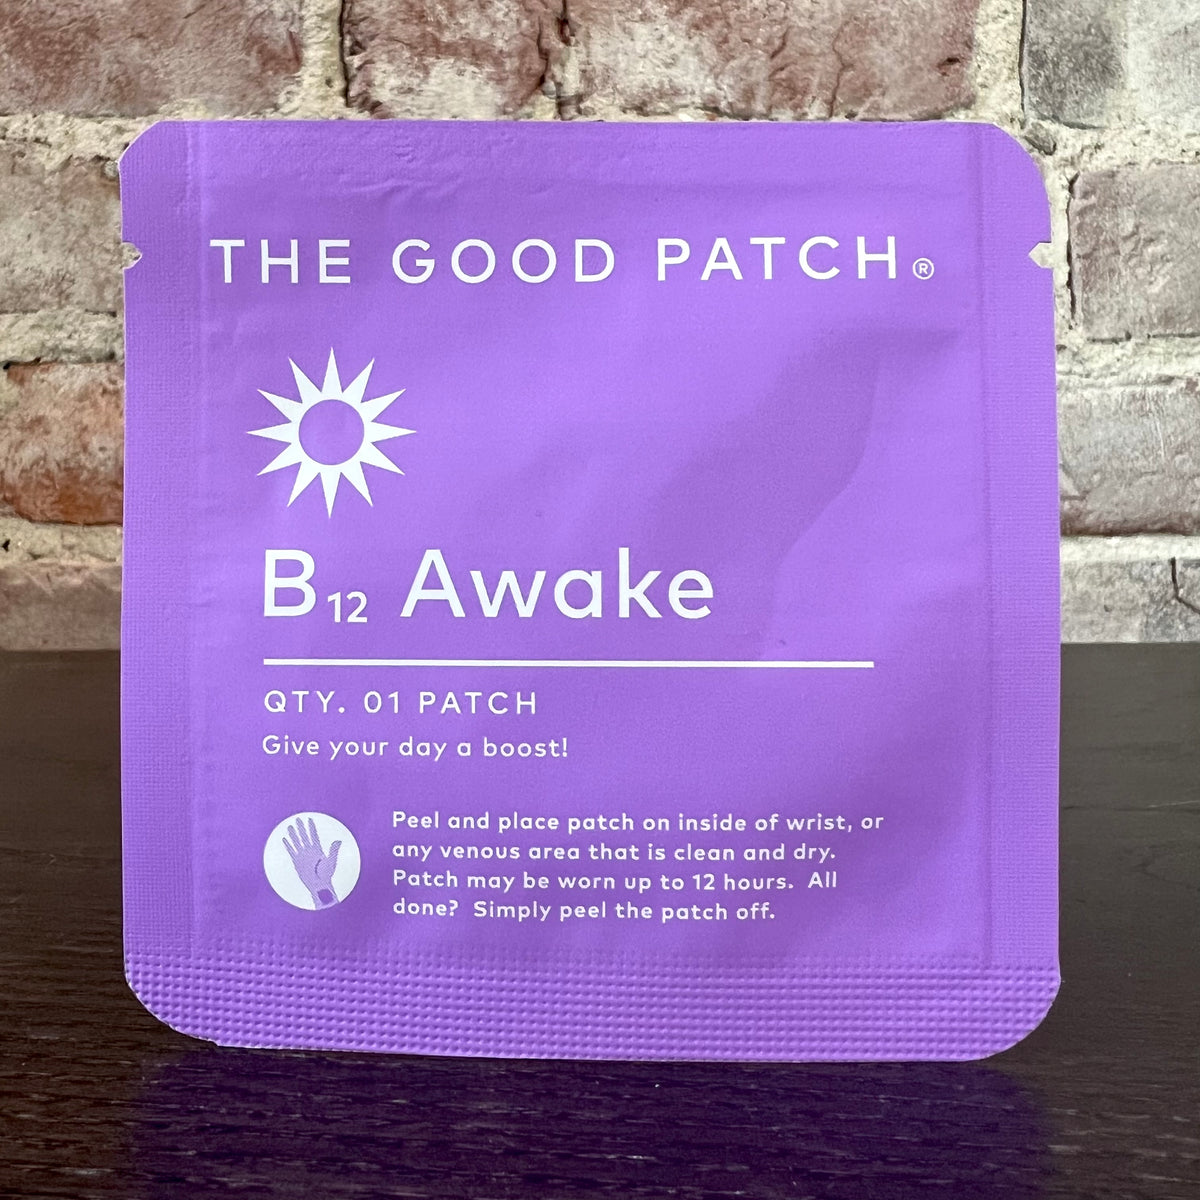 The Good Patch - Relief – Makes Scents